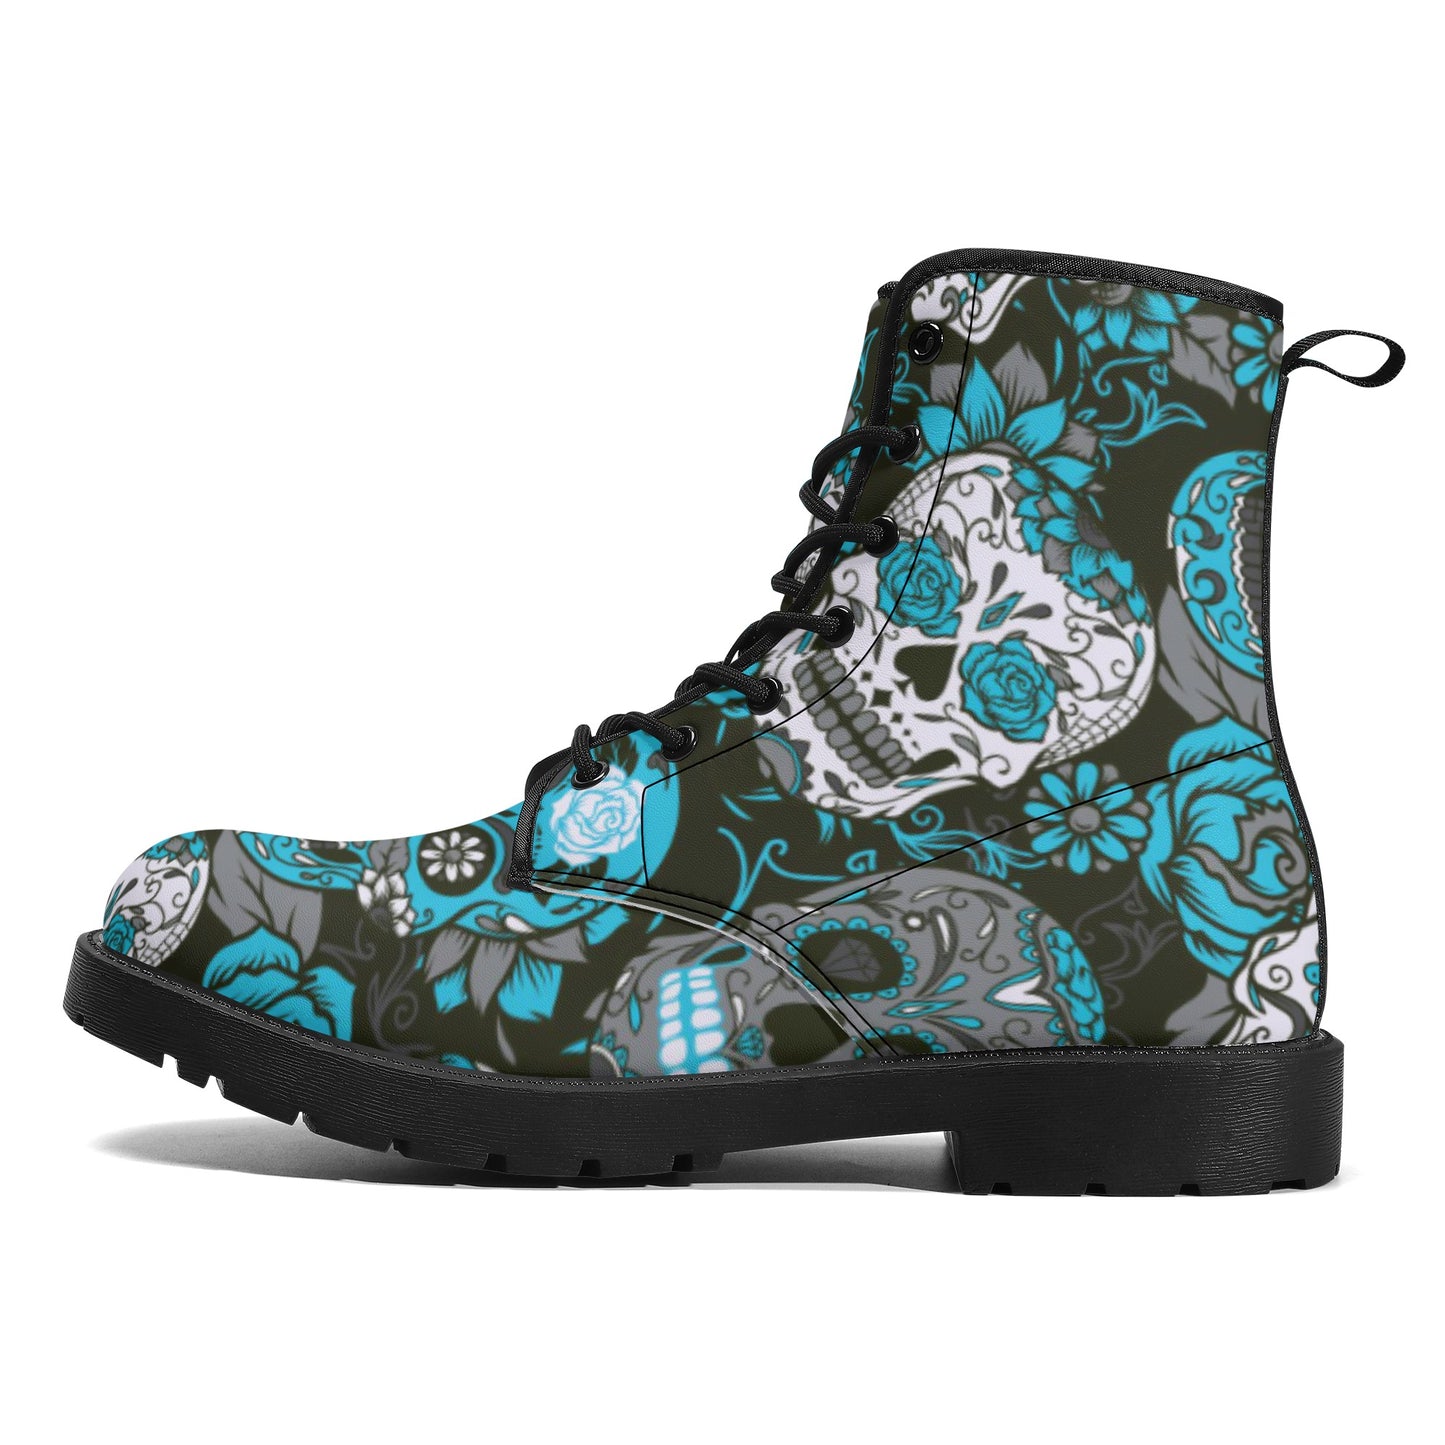 Day of the dead Mexican Calaveras skull sugar skull Women's Leather Boots